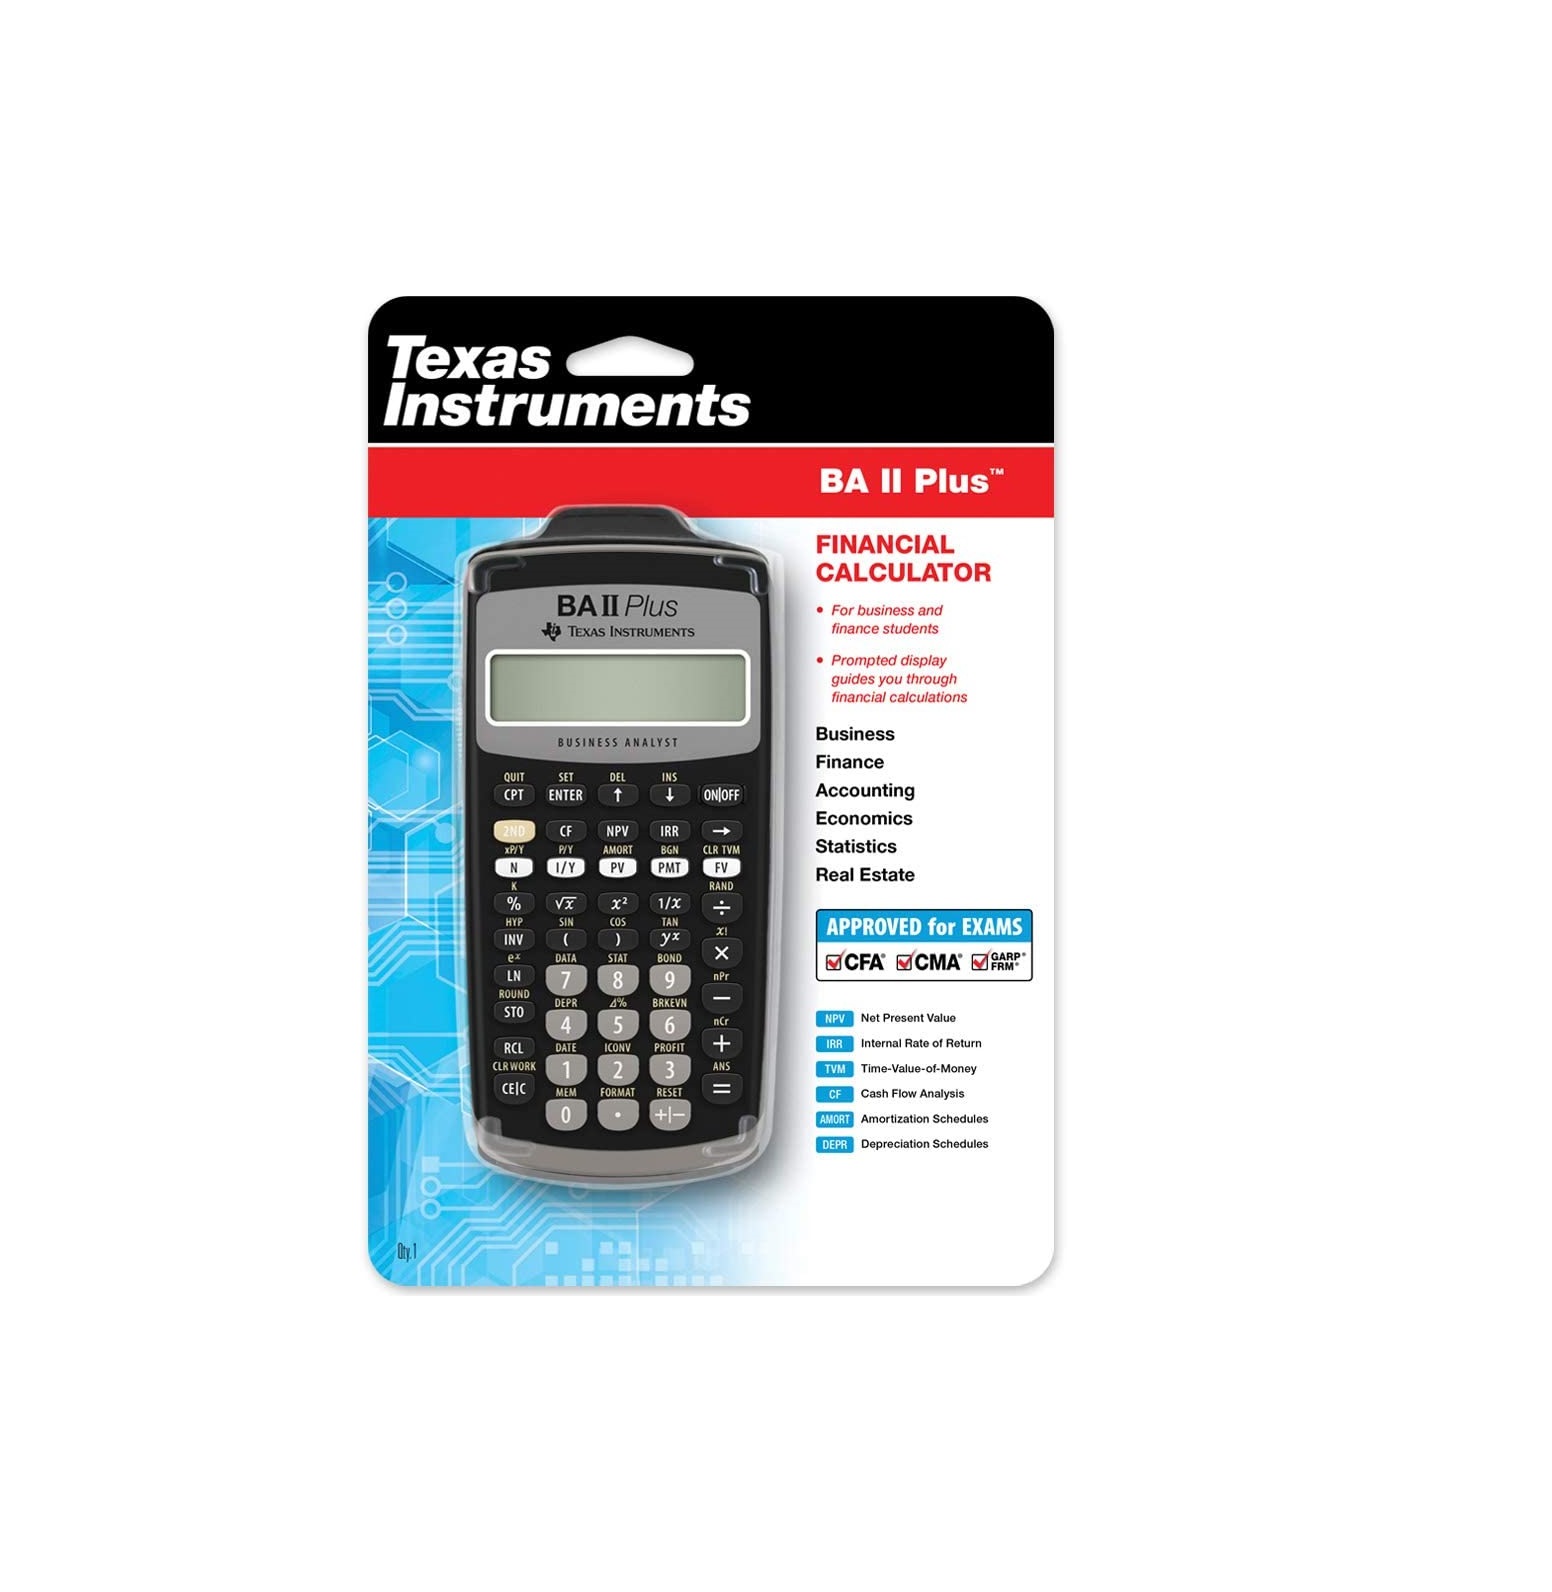 Designed for business professionals and students, this easy-to-use  financial calculator delivers powerful computation functions and memory.